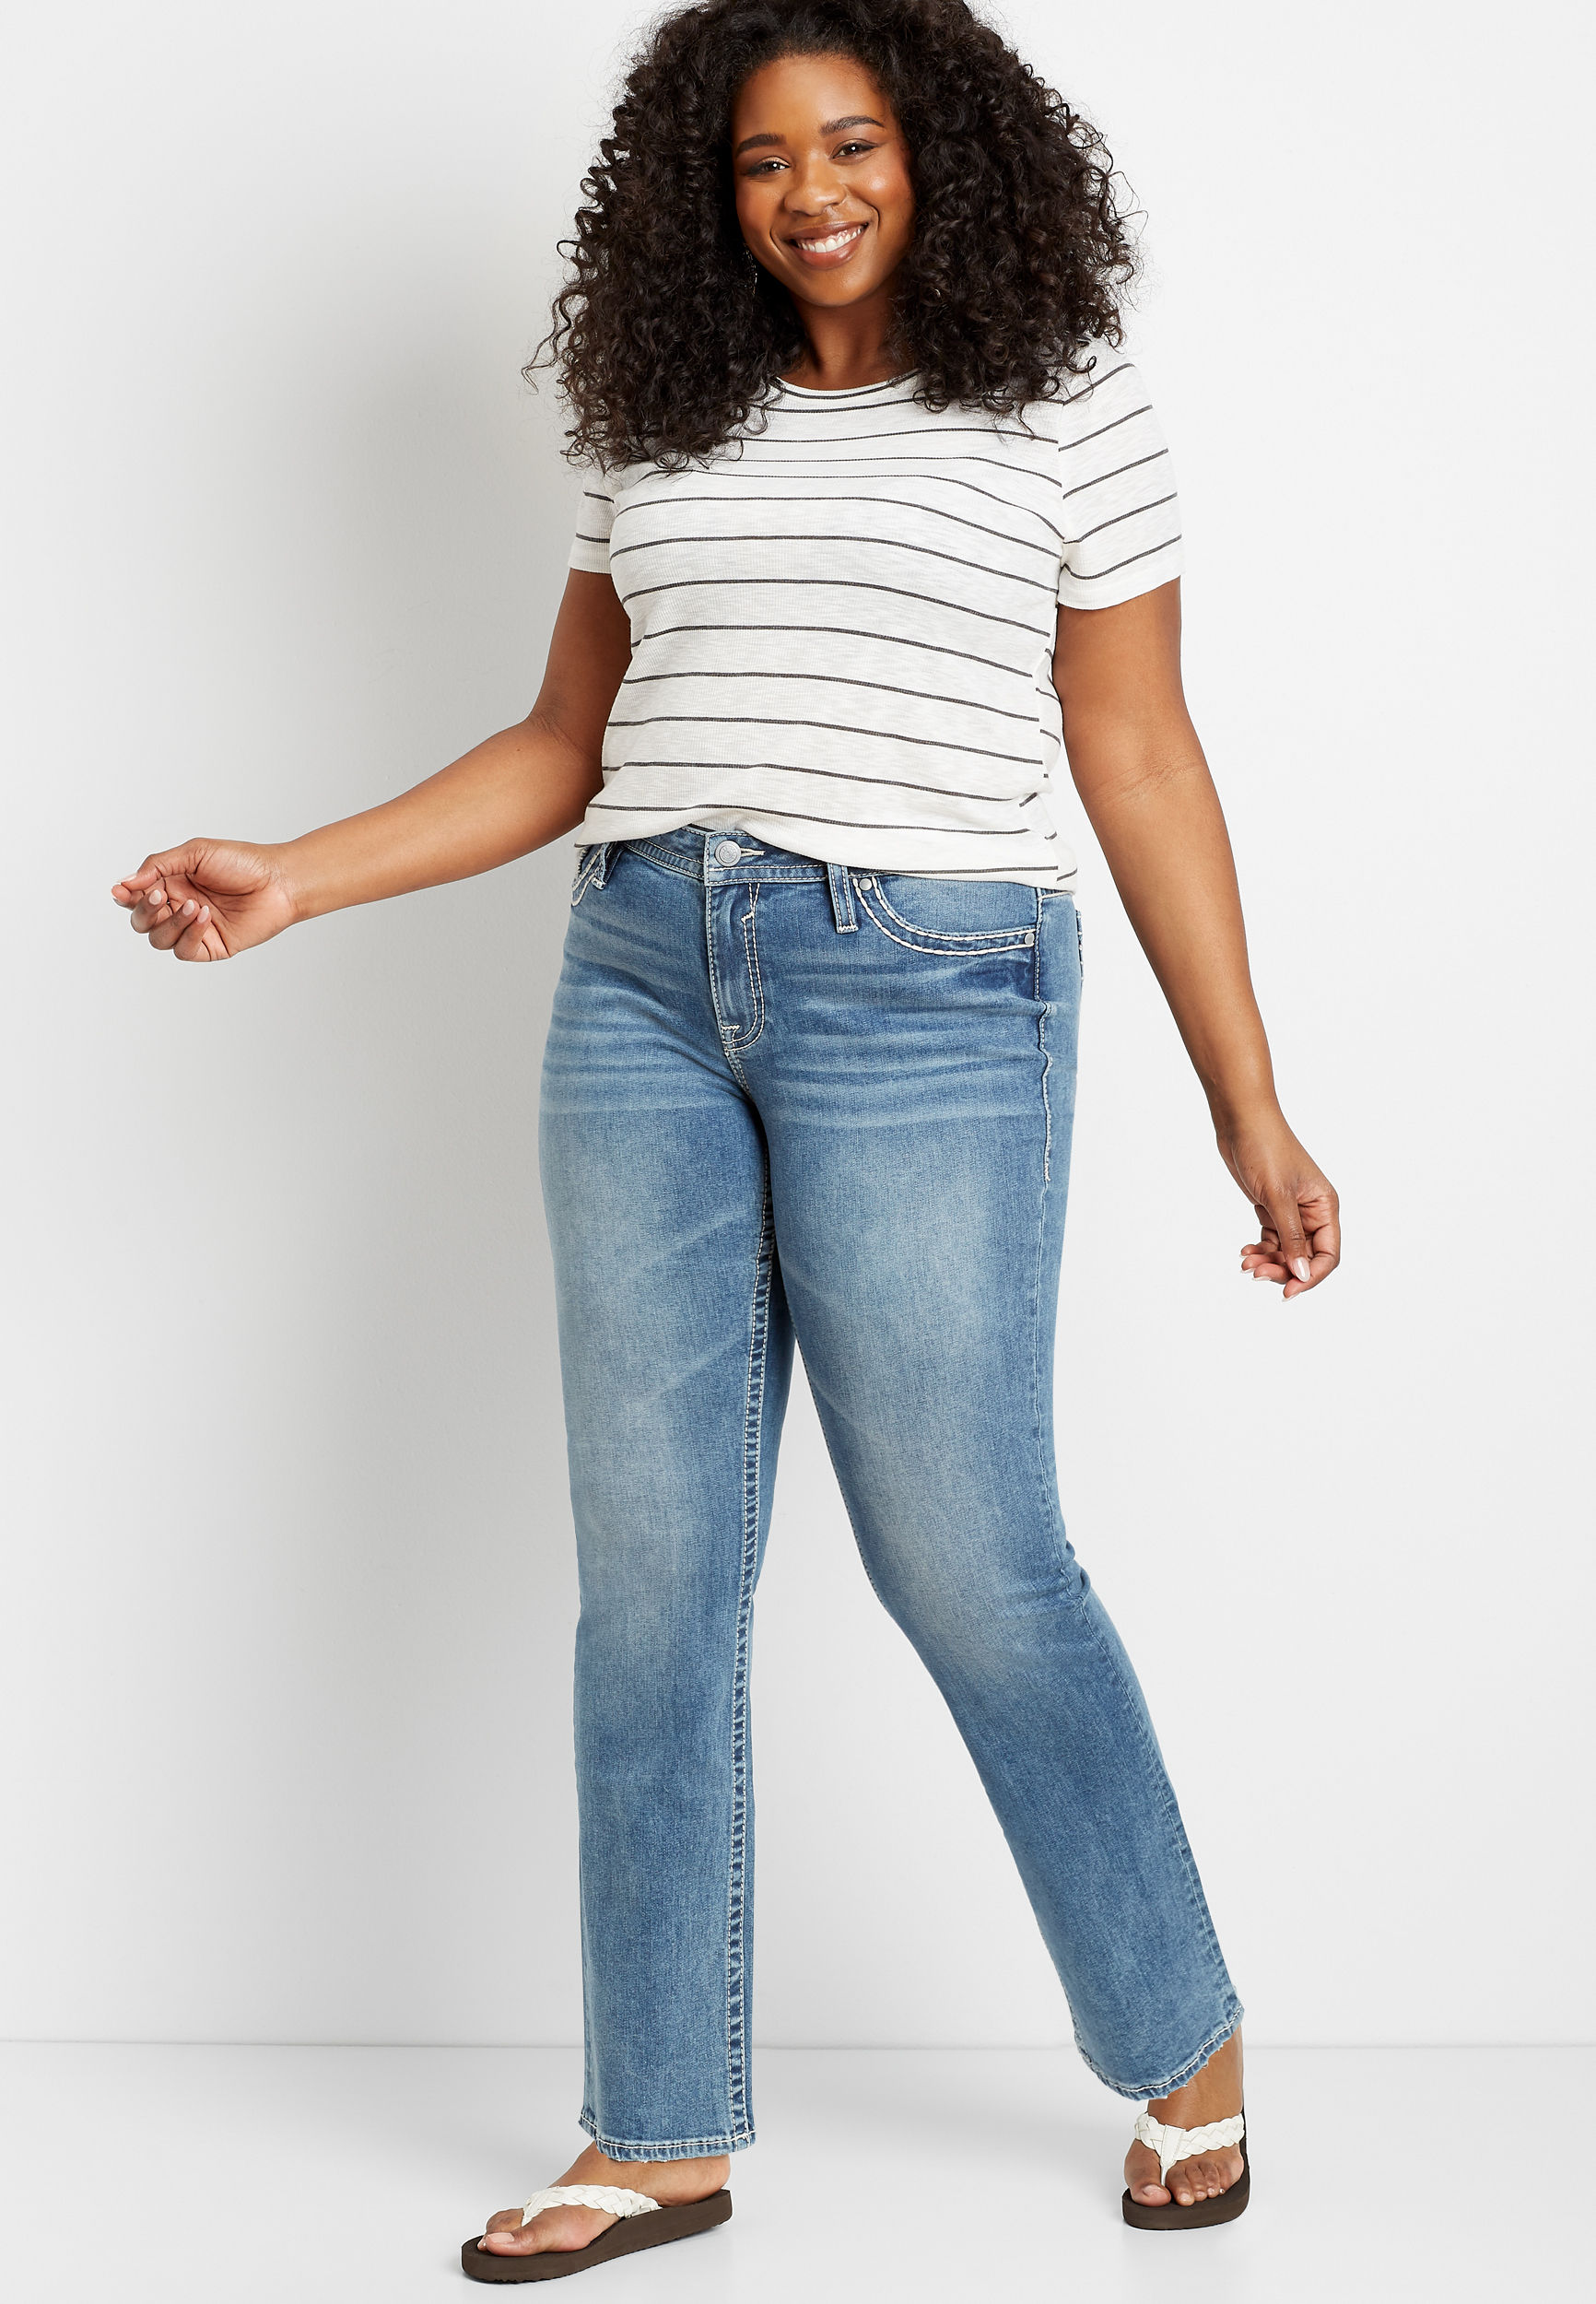 Women's Plus Size Bootcut Jeans | maurices